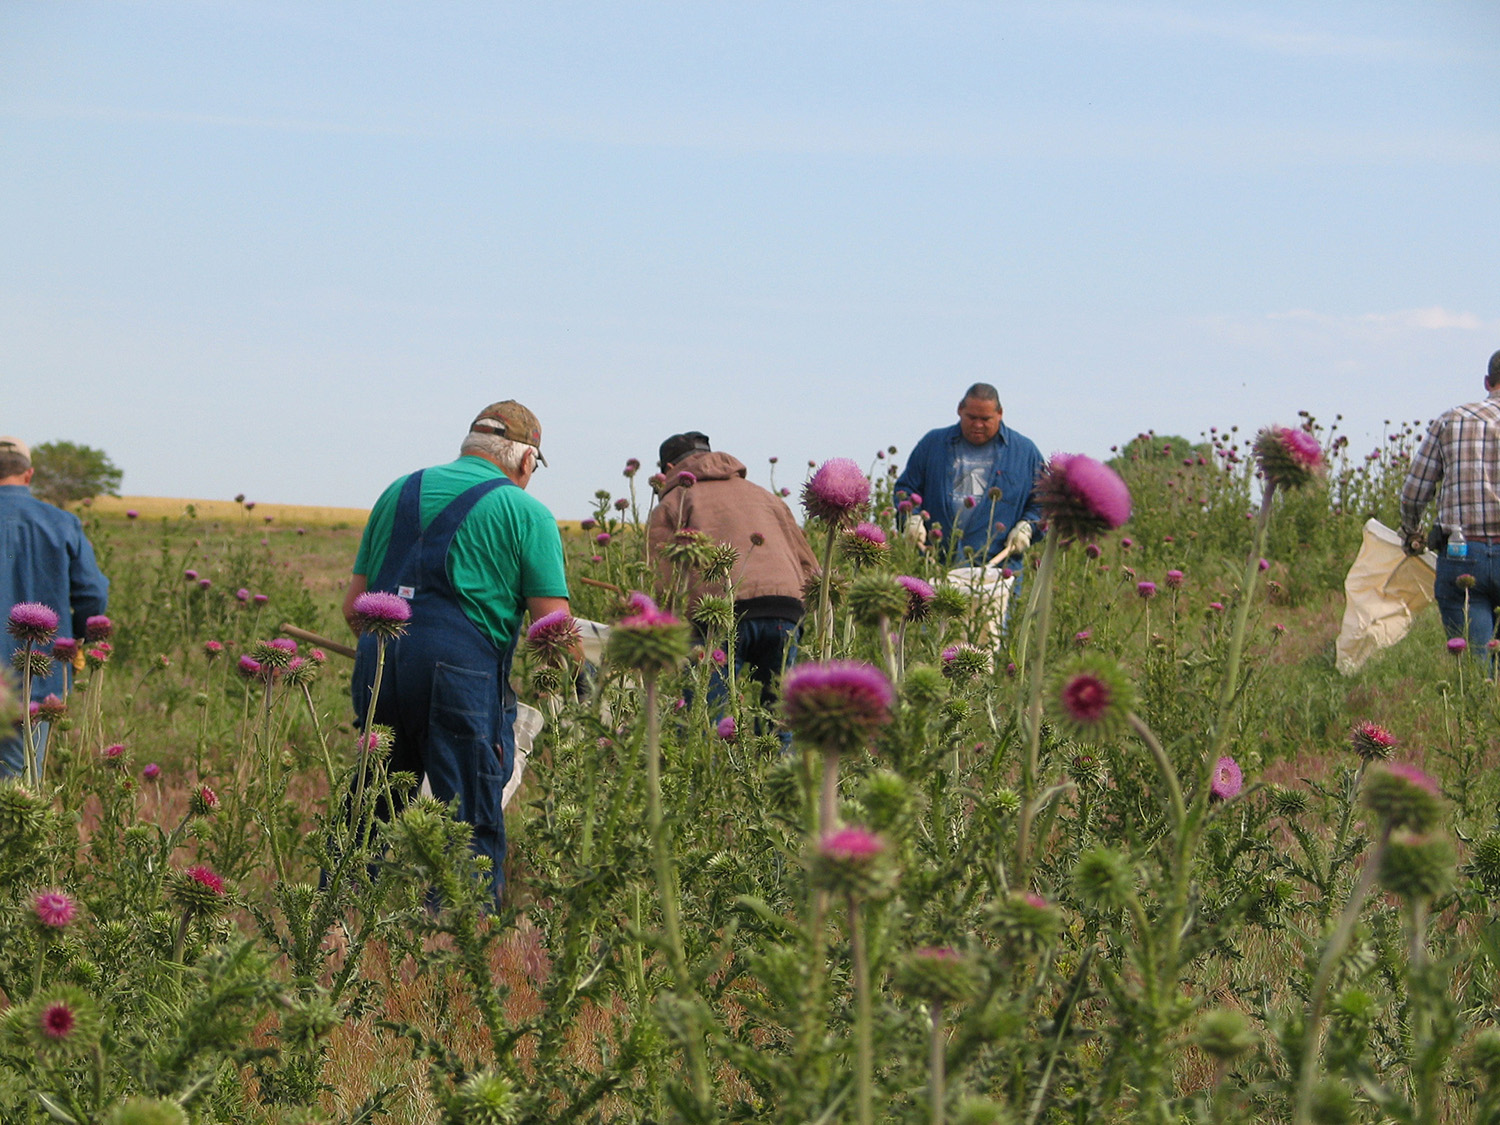 Several people gather musk thistle's.